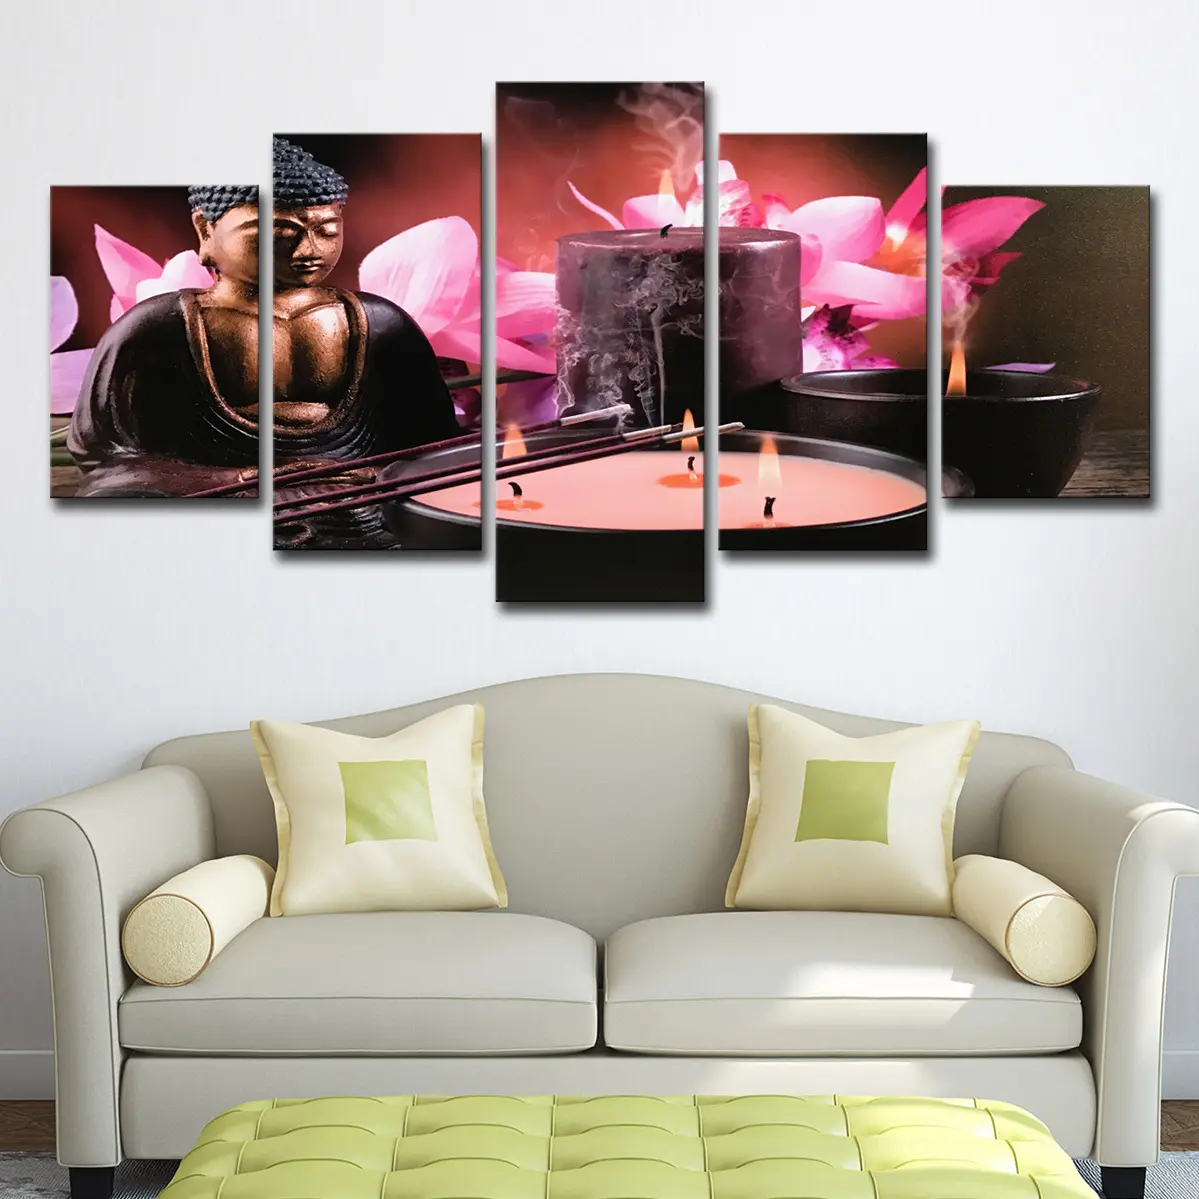 Candlestick Pink Orchid Contemporary Poster Wall Art Canvas Print Modern Buddha Painting for SPA Club Decoration